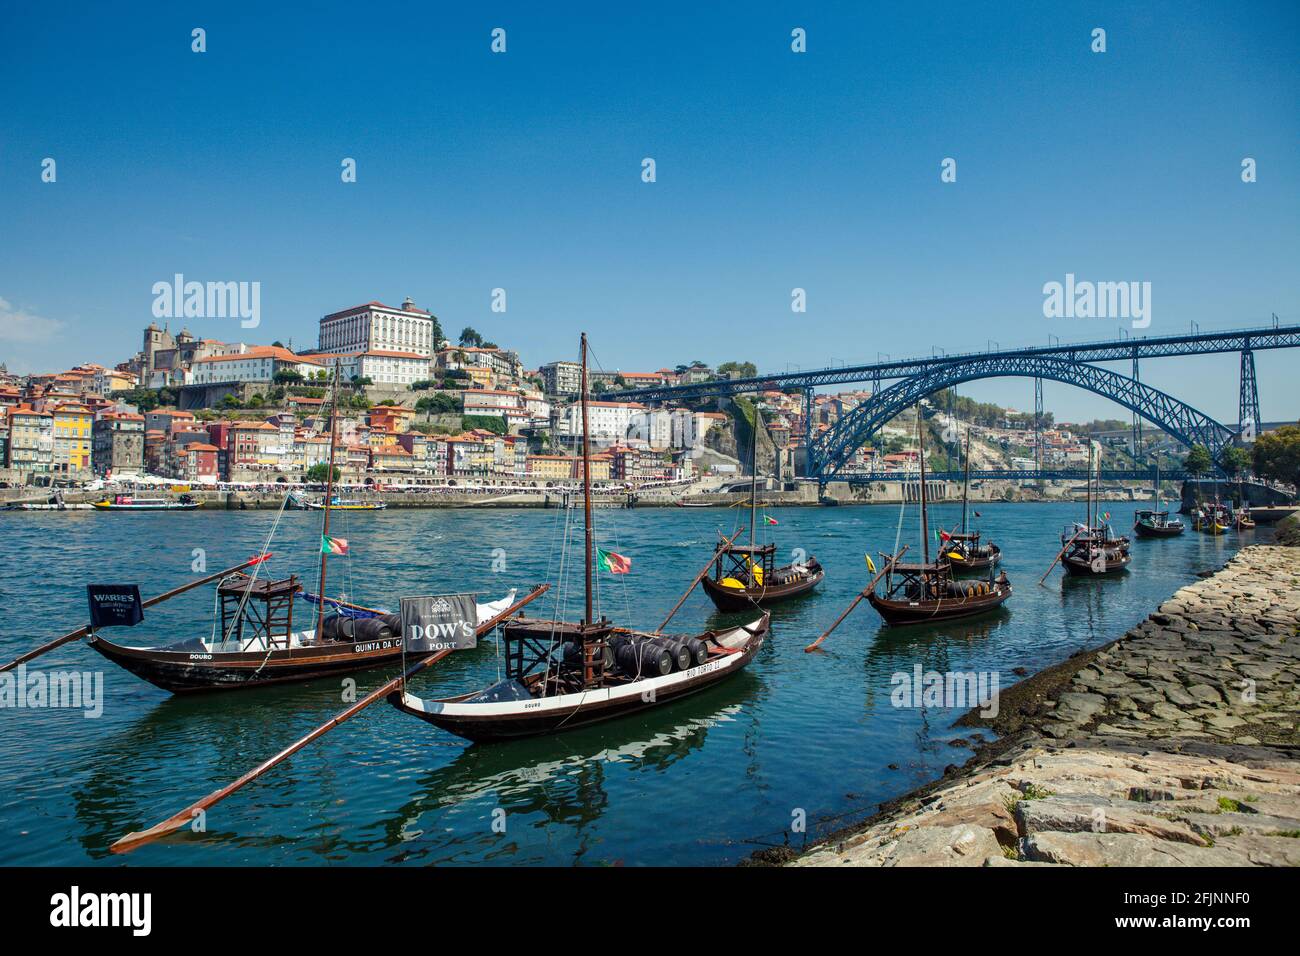 Barges on the river Douro in the historical city of Porto, with the iconic Dom Luis bridge in the background. Stock Photo